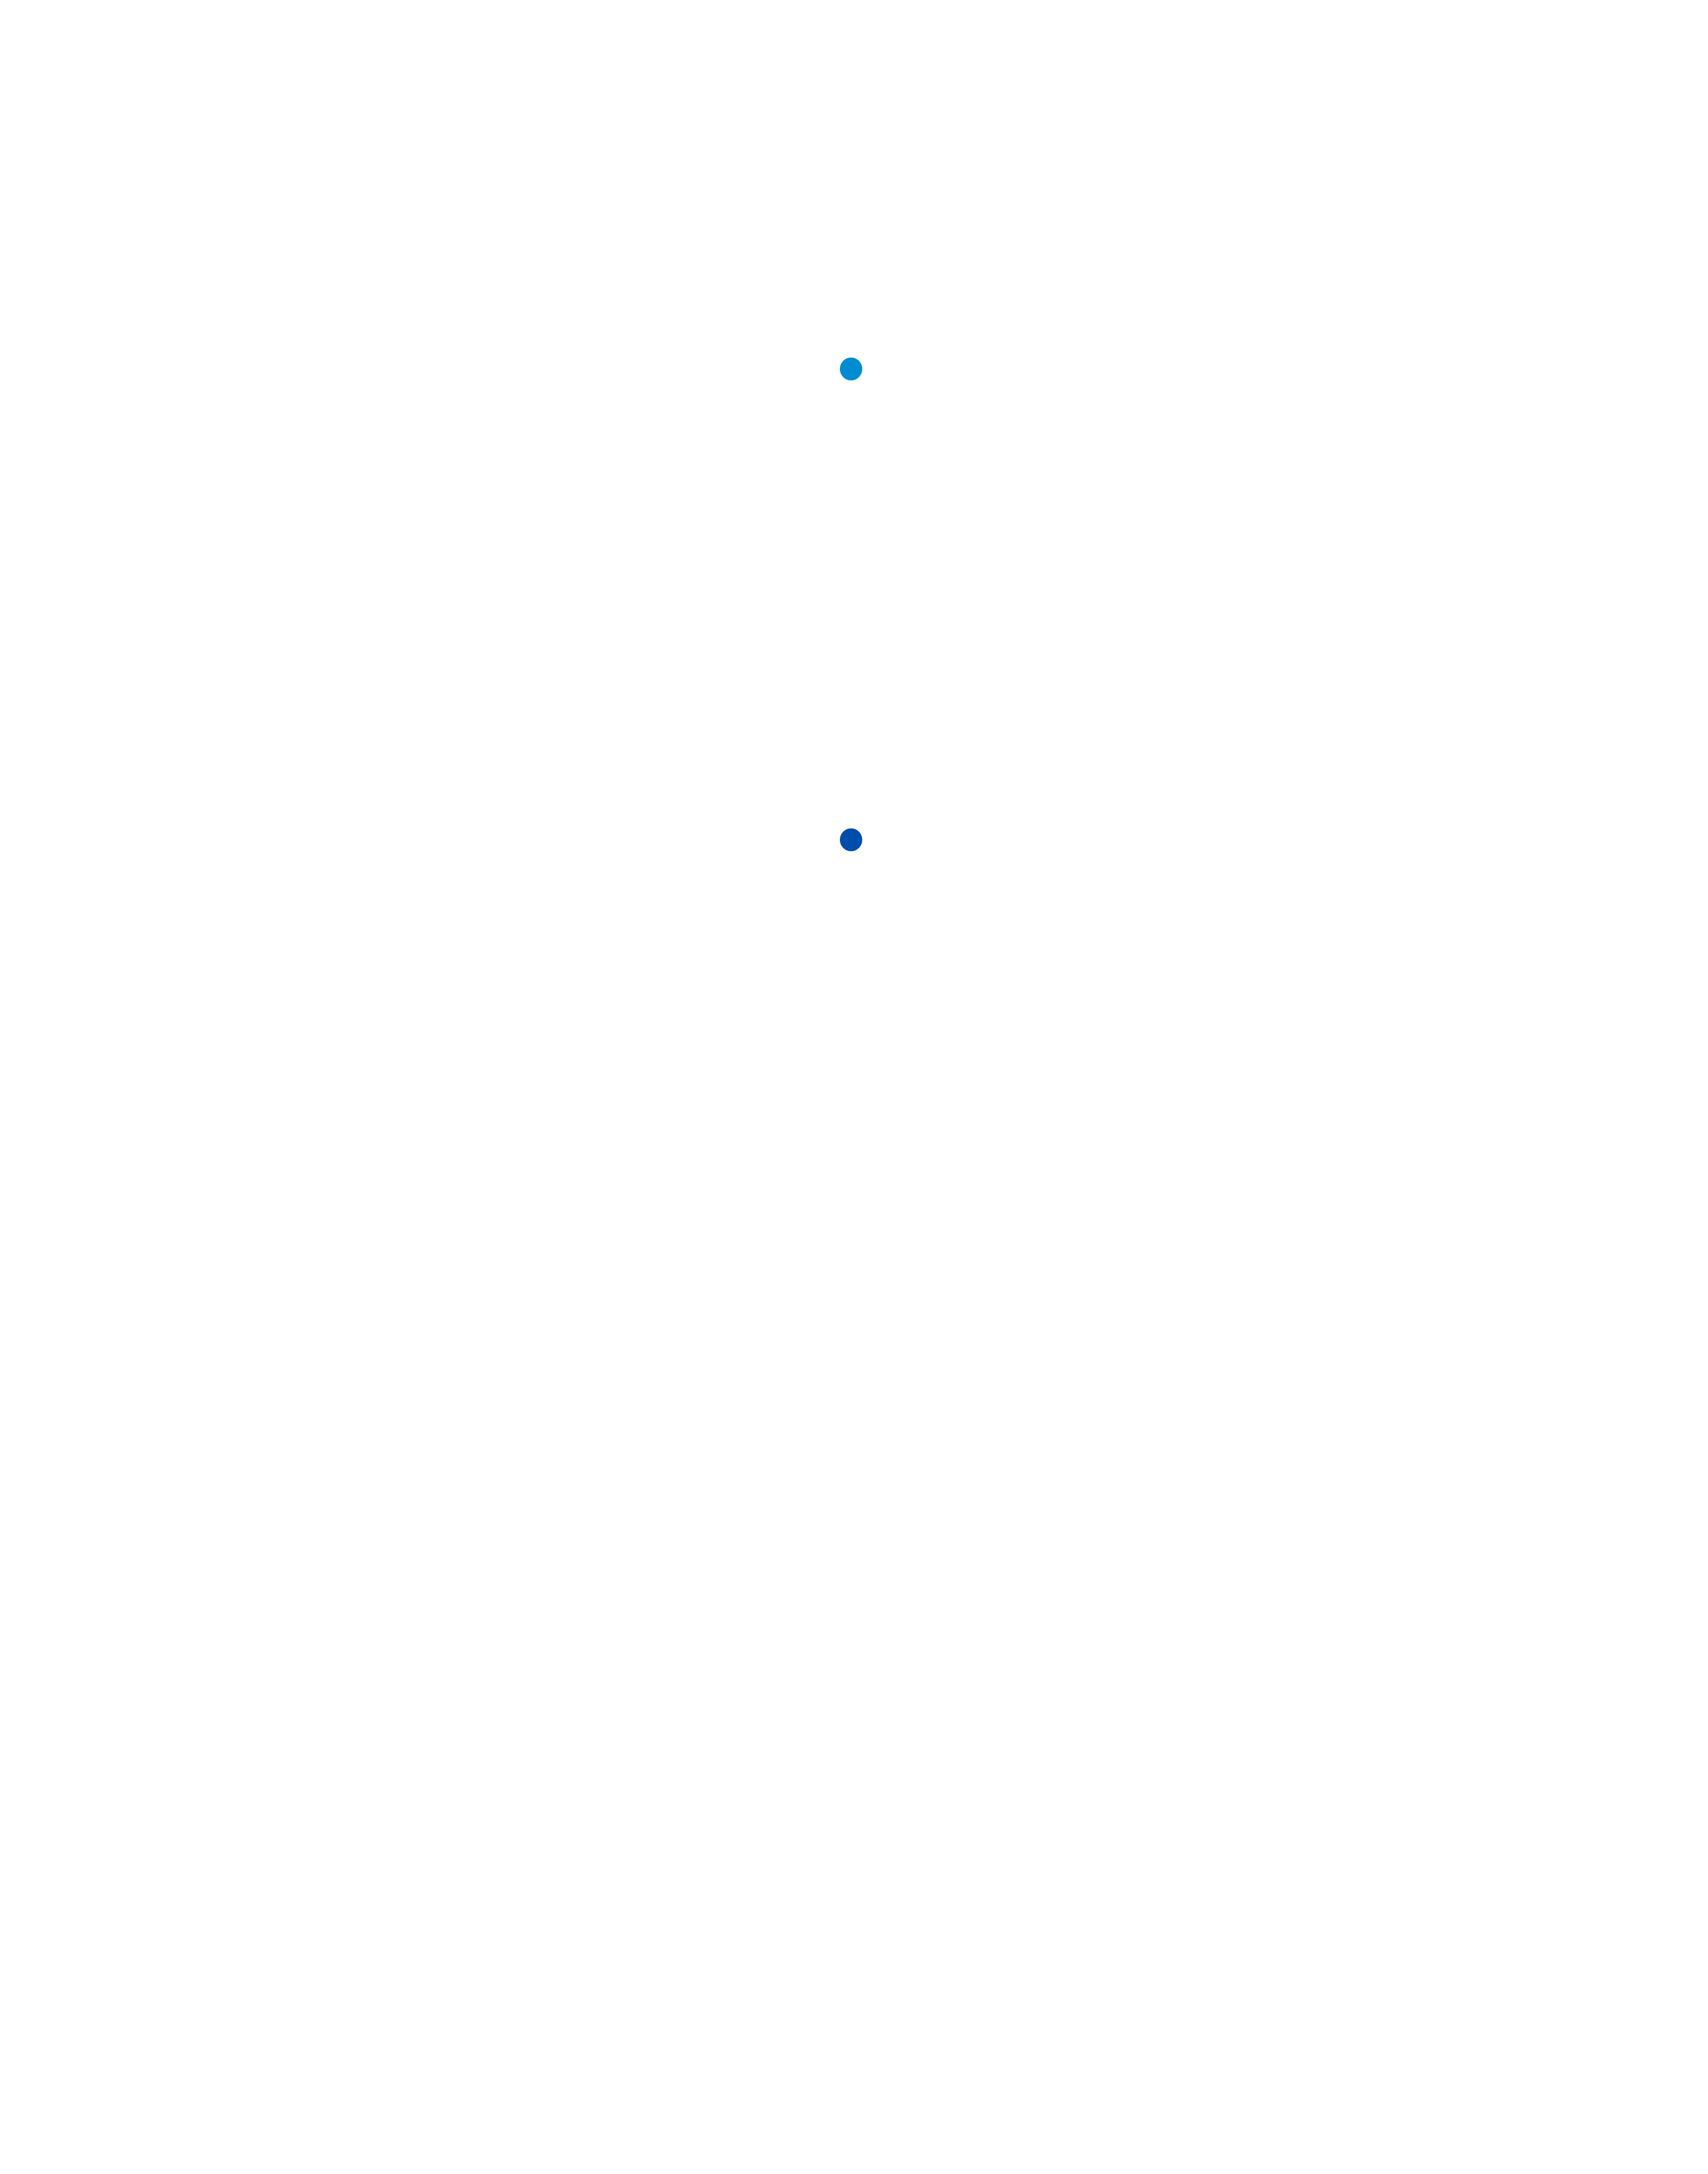 A timeline graphic showing key milestones in Merici College's academic transition over the past 8 years.